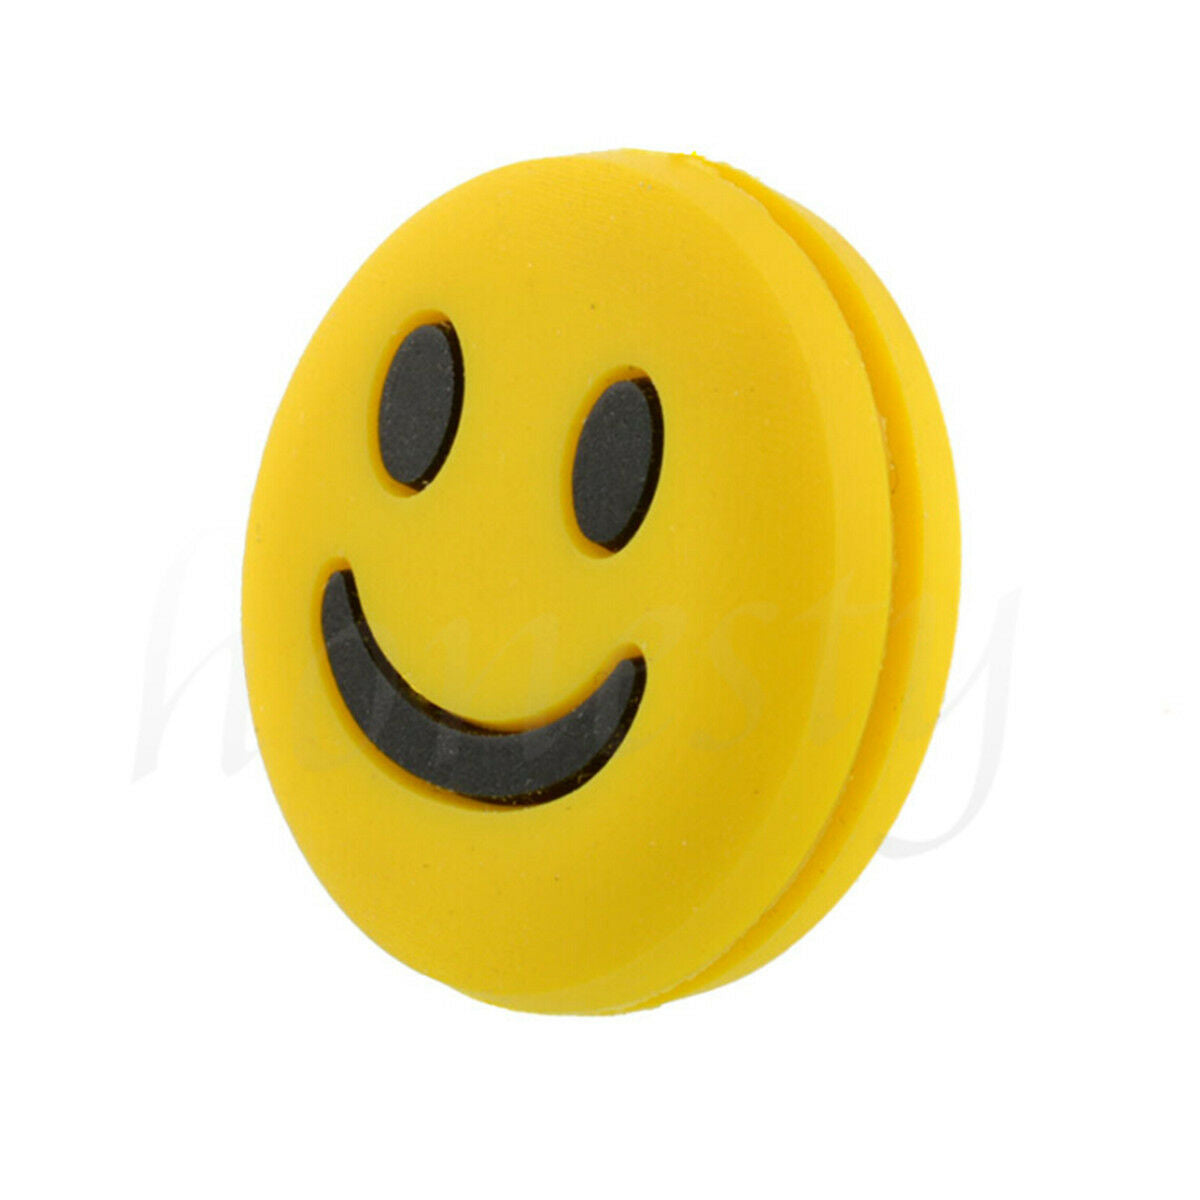 4pcs Silicone Rubber Smile Face Tennis Racquet Vibration Dampener Shock Absorber